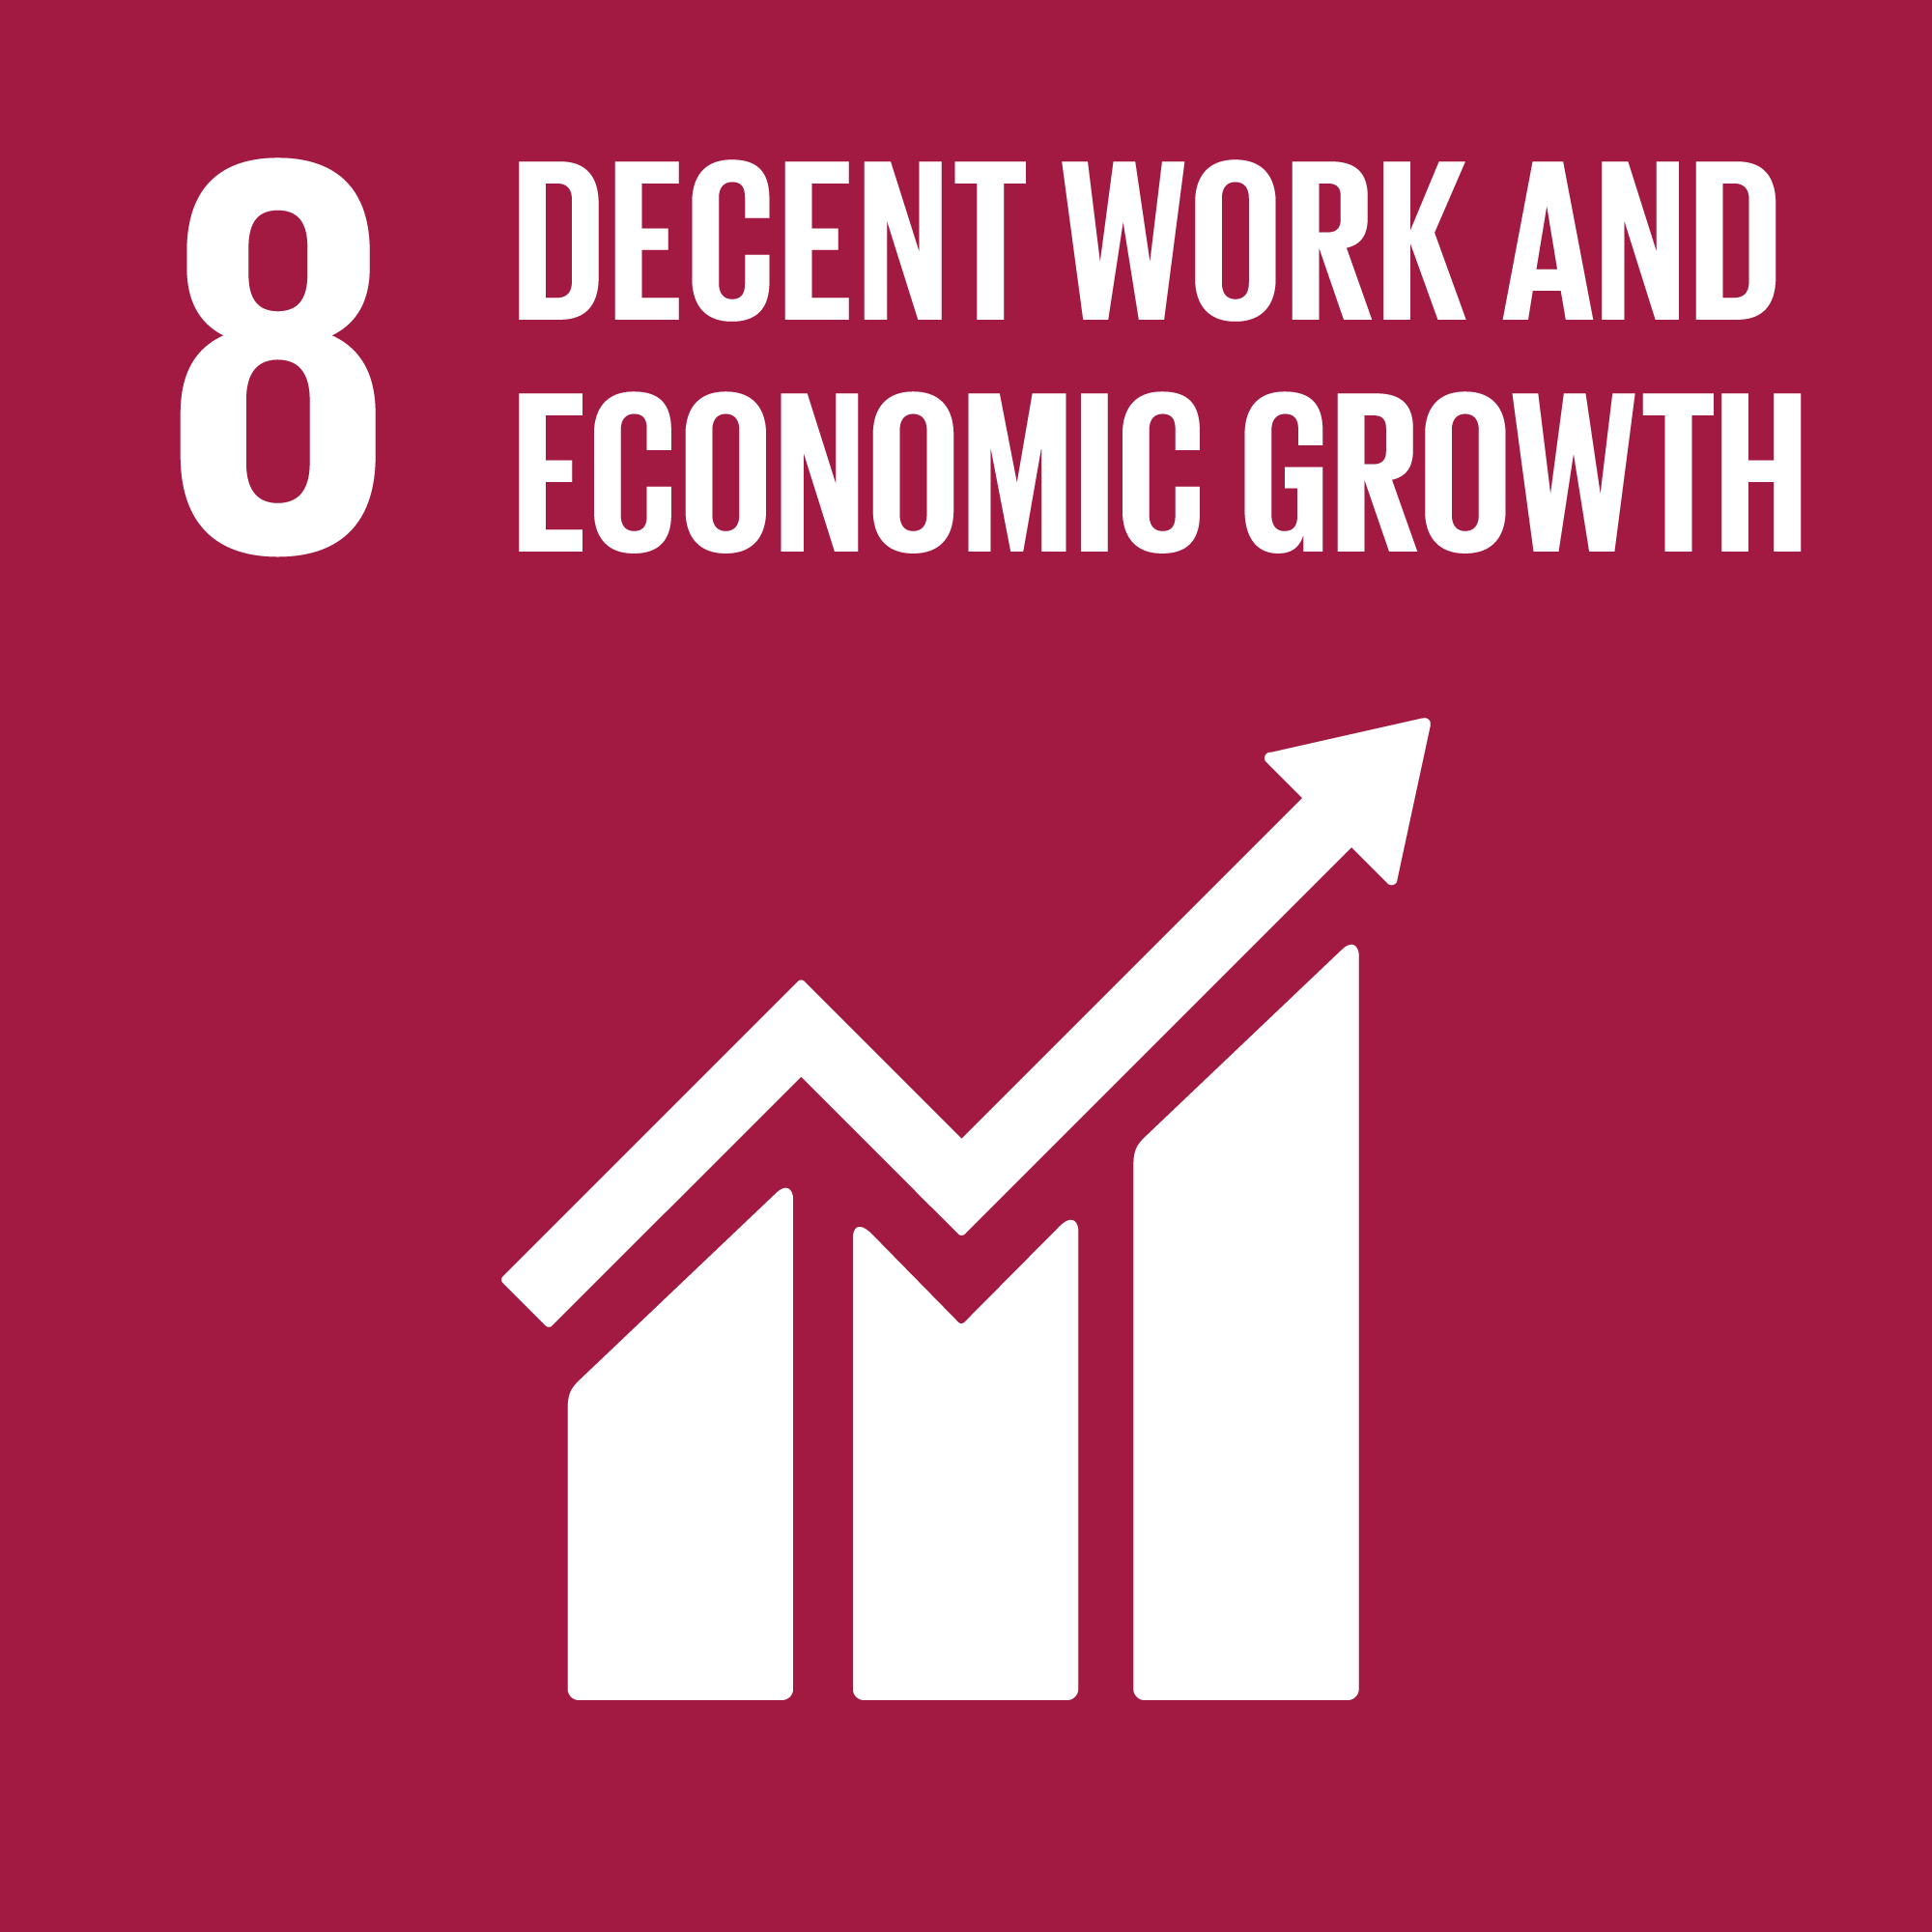 Sustainable Development Goal 8: Decent Work and Economic Growth